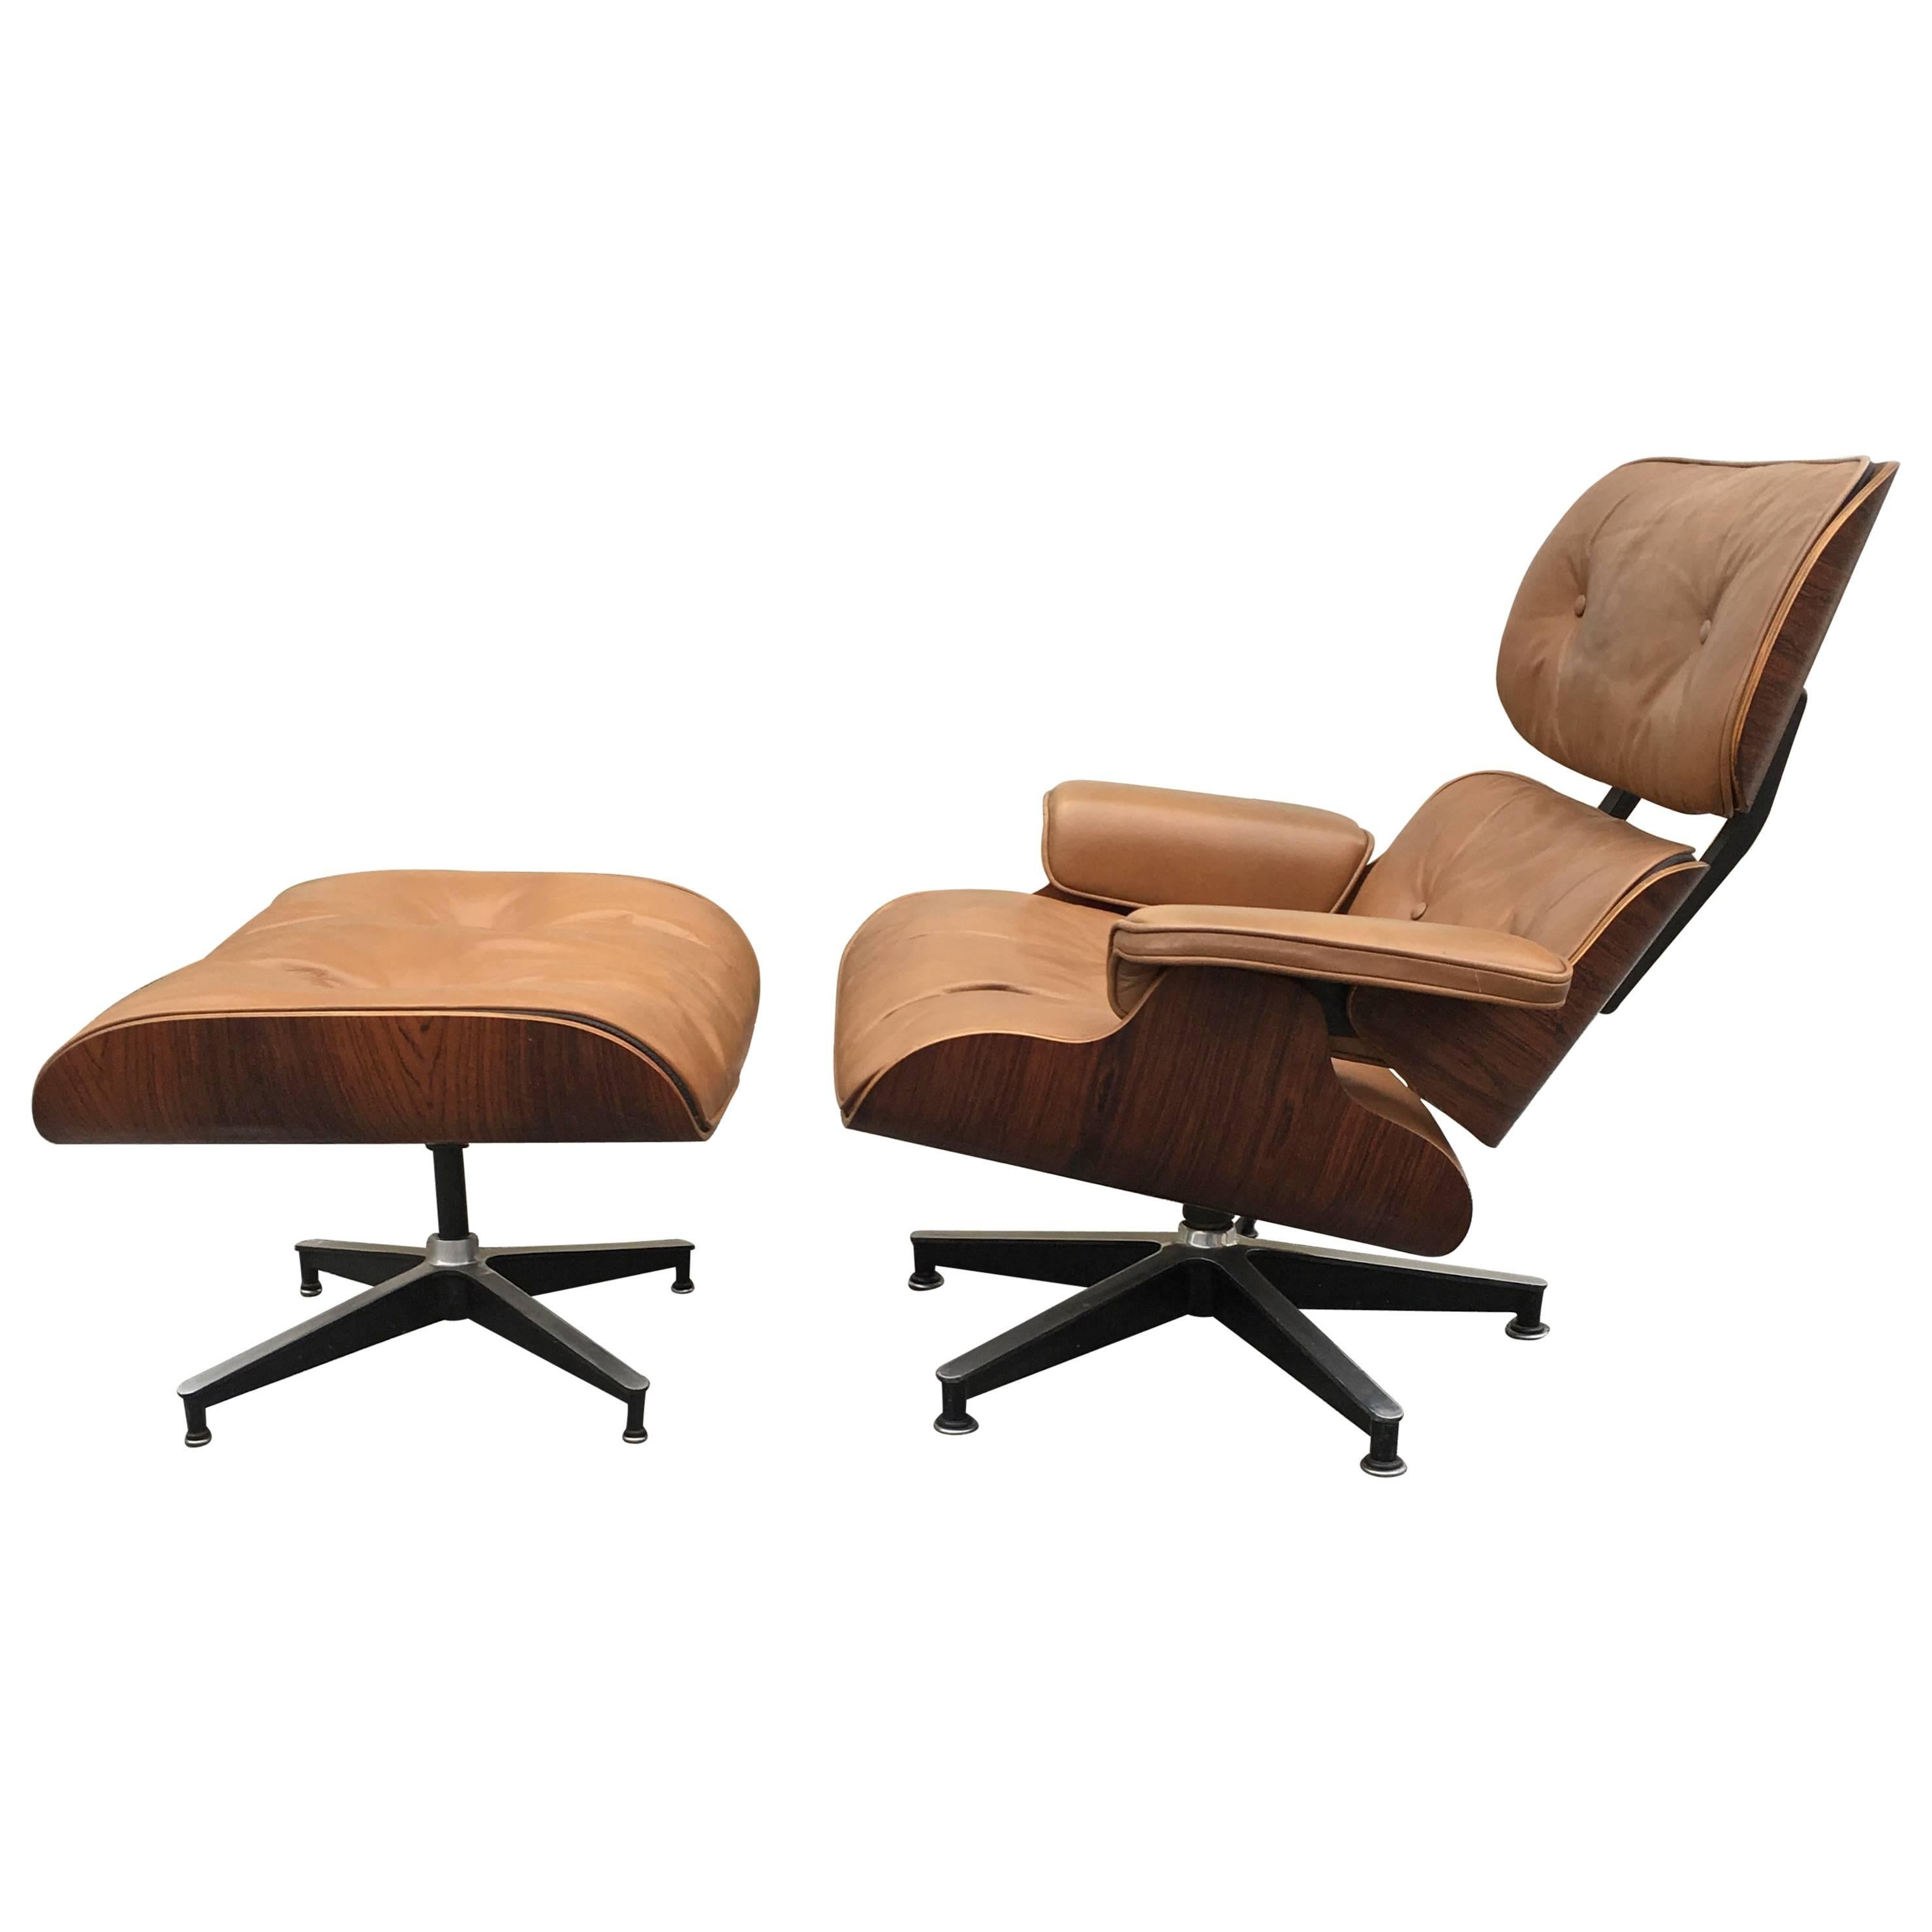 Tan/Rosewood Herman Miller Eames Lounge Chair and Ottoman